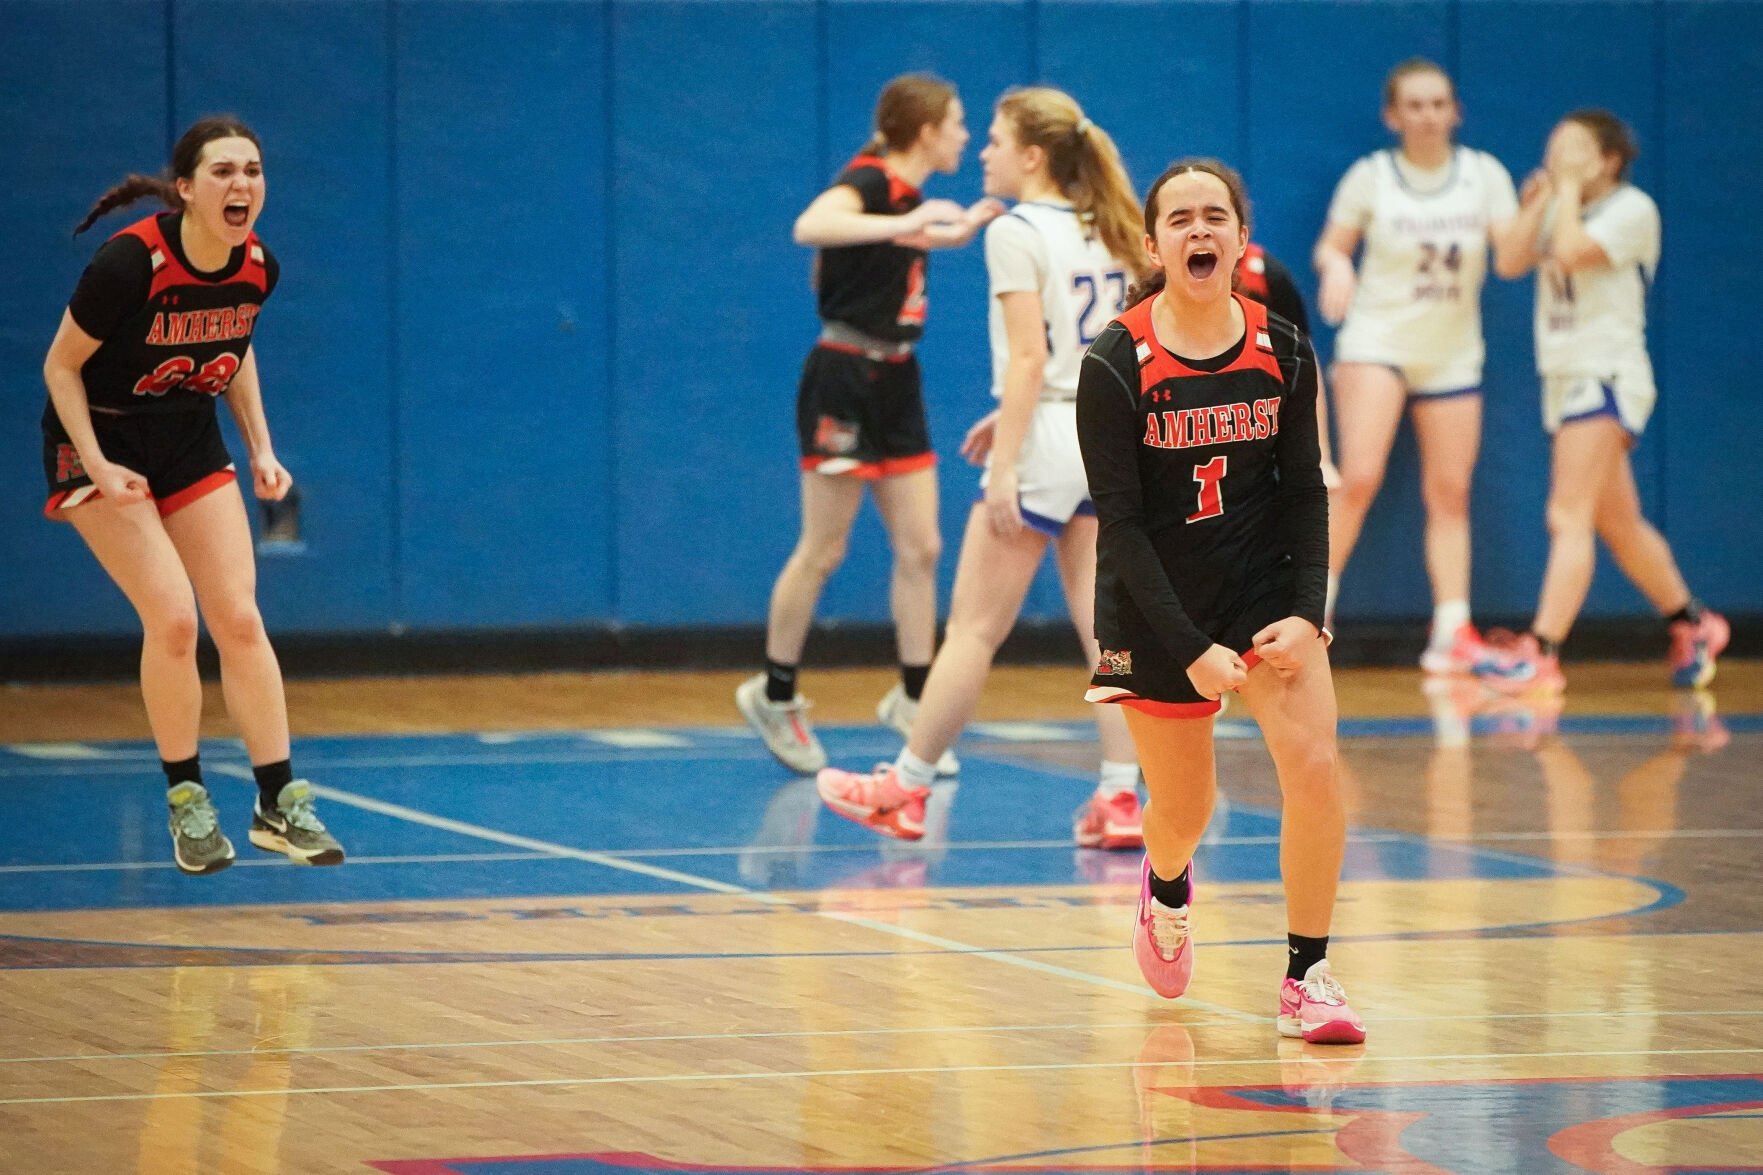 Amherst Upsets Top-Seeded Williamsville South in Girls Basketball Quarterfinals with Four Players in Double Figures